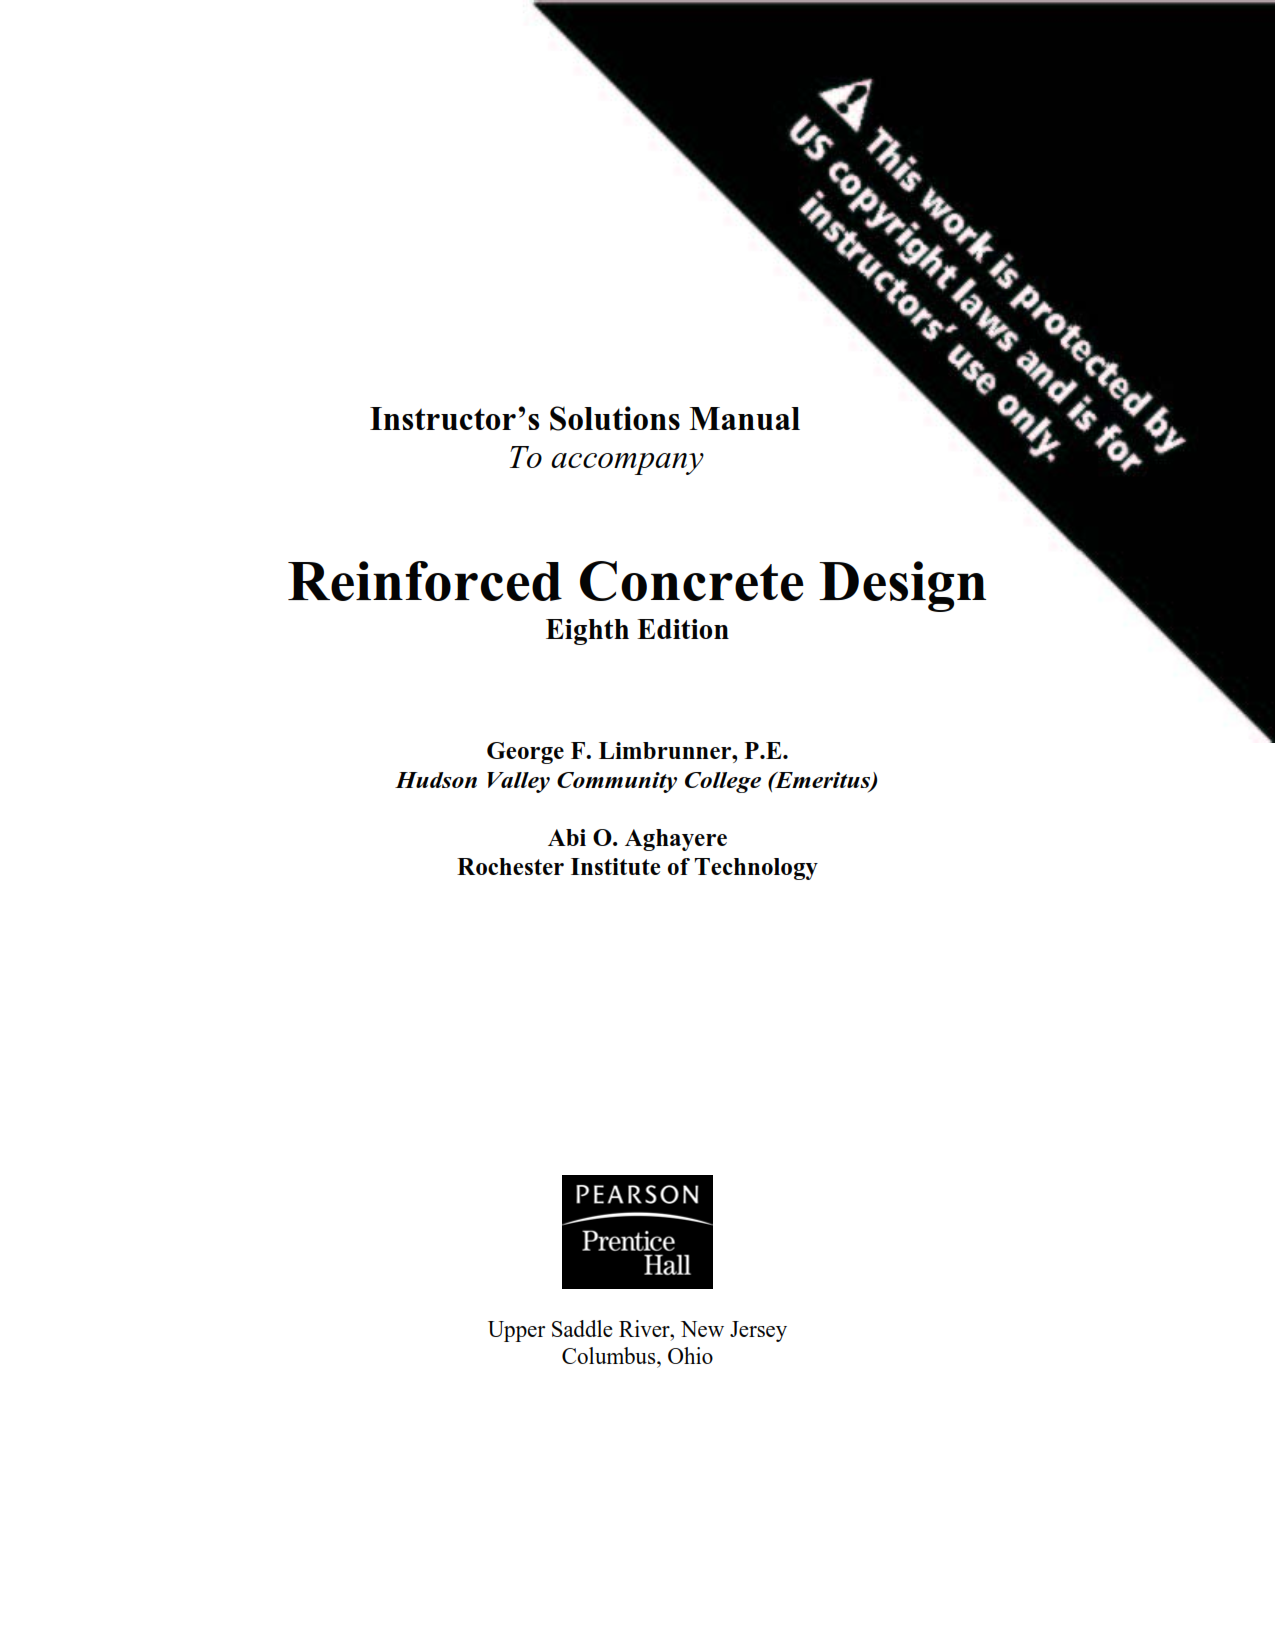 download free solution manual of Reinforced Concrete Design 8th edition by Aghayere & Limbrunner book in pdf format pdf ebook 